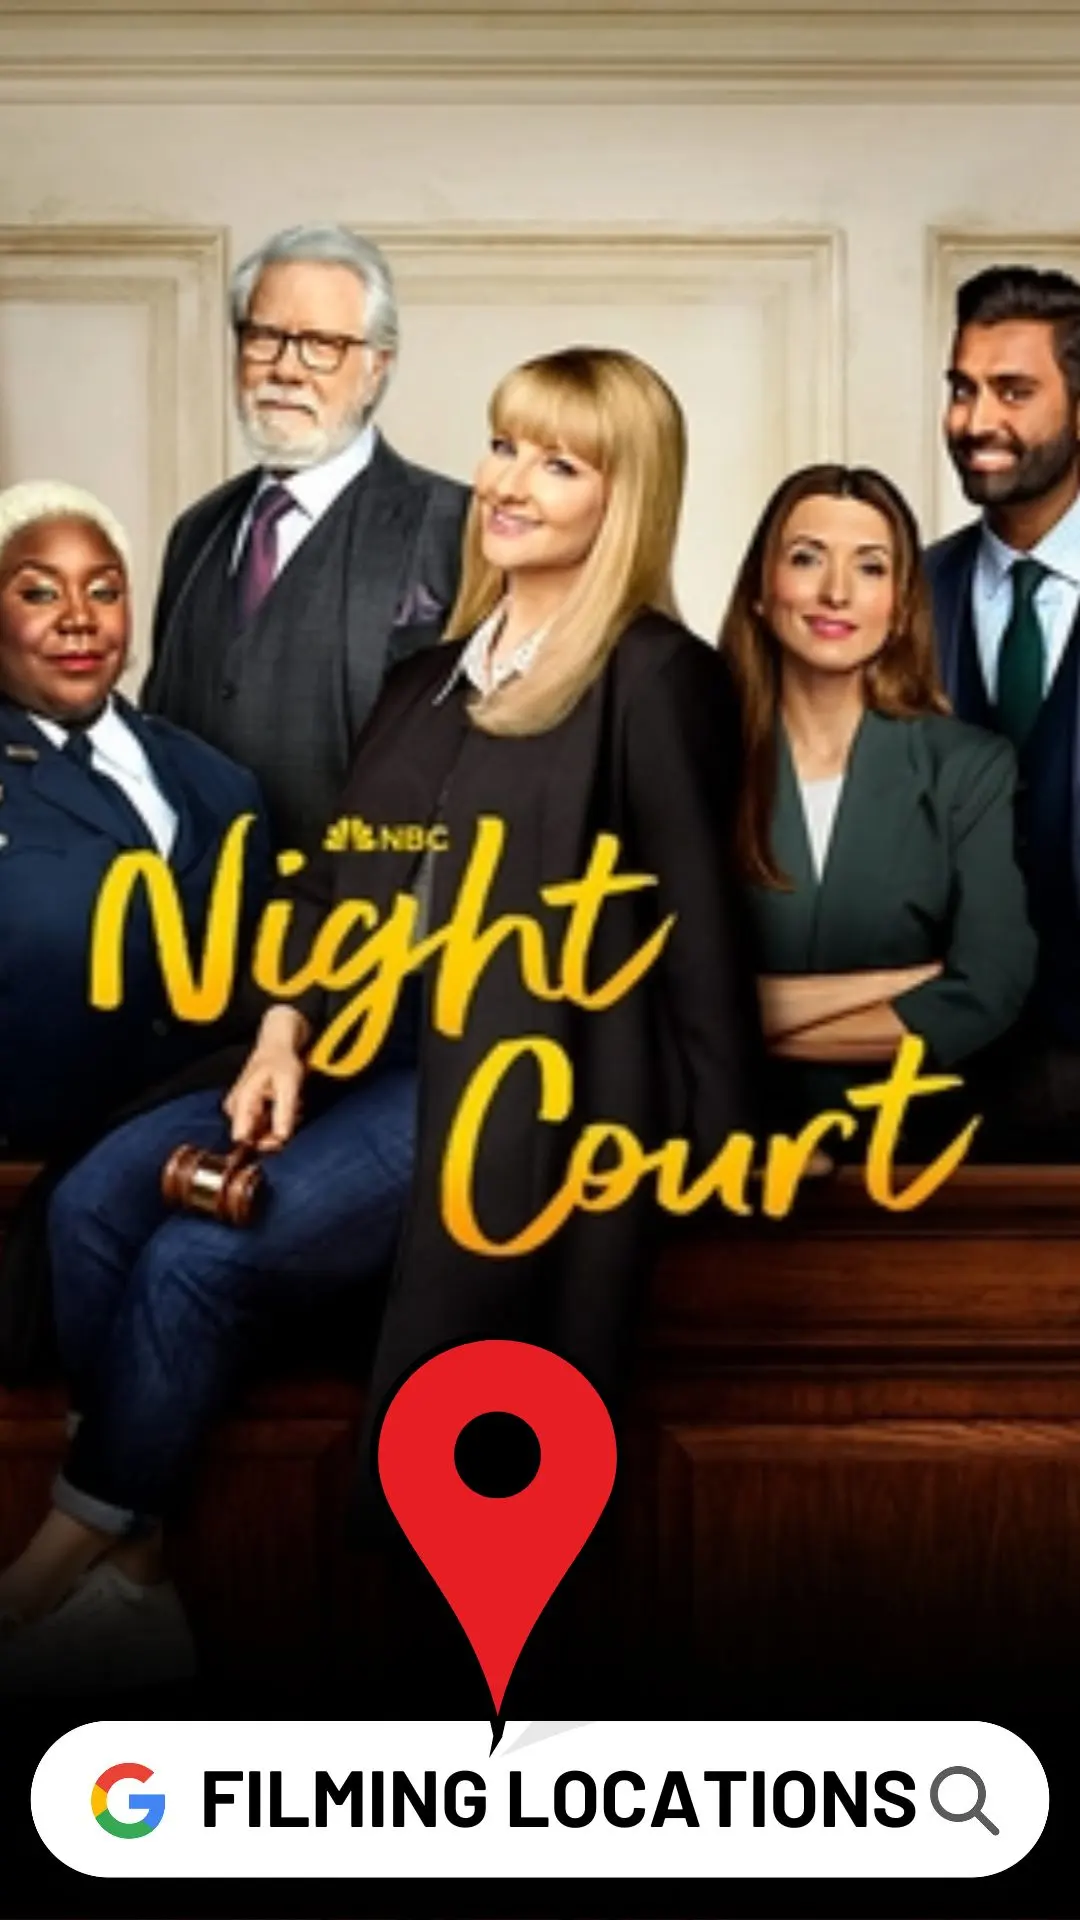 Night Court Filming Locations